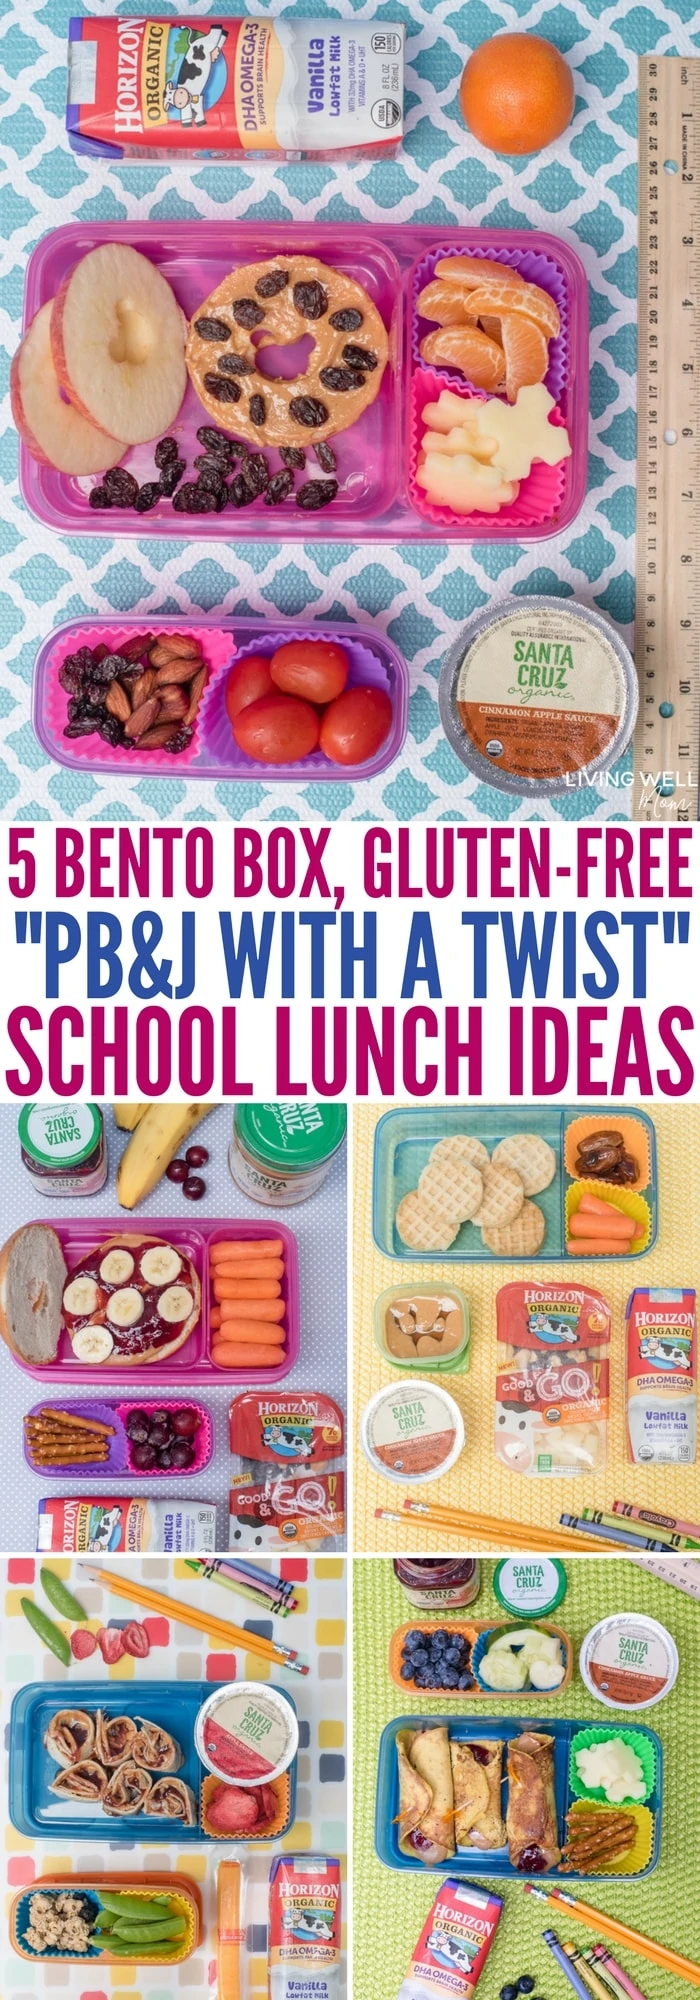 Fun gluten-free school lunch ideas plus 5 tasty gluten-free twists on peanut butter & jelly sandwiches kids will love! Easy bento box inspiration with nutritious snacks and extras.